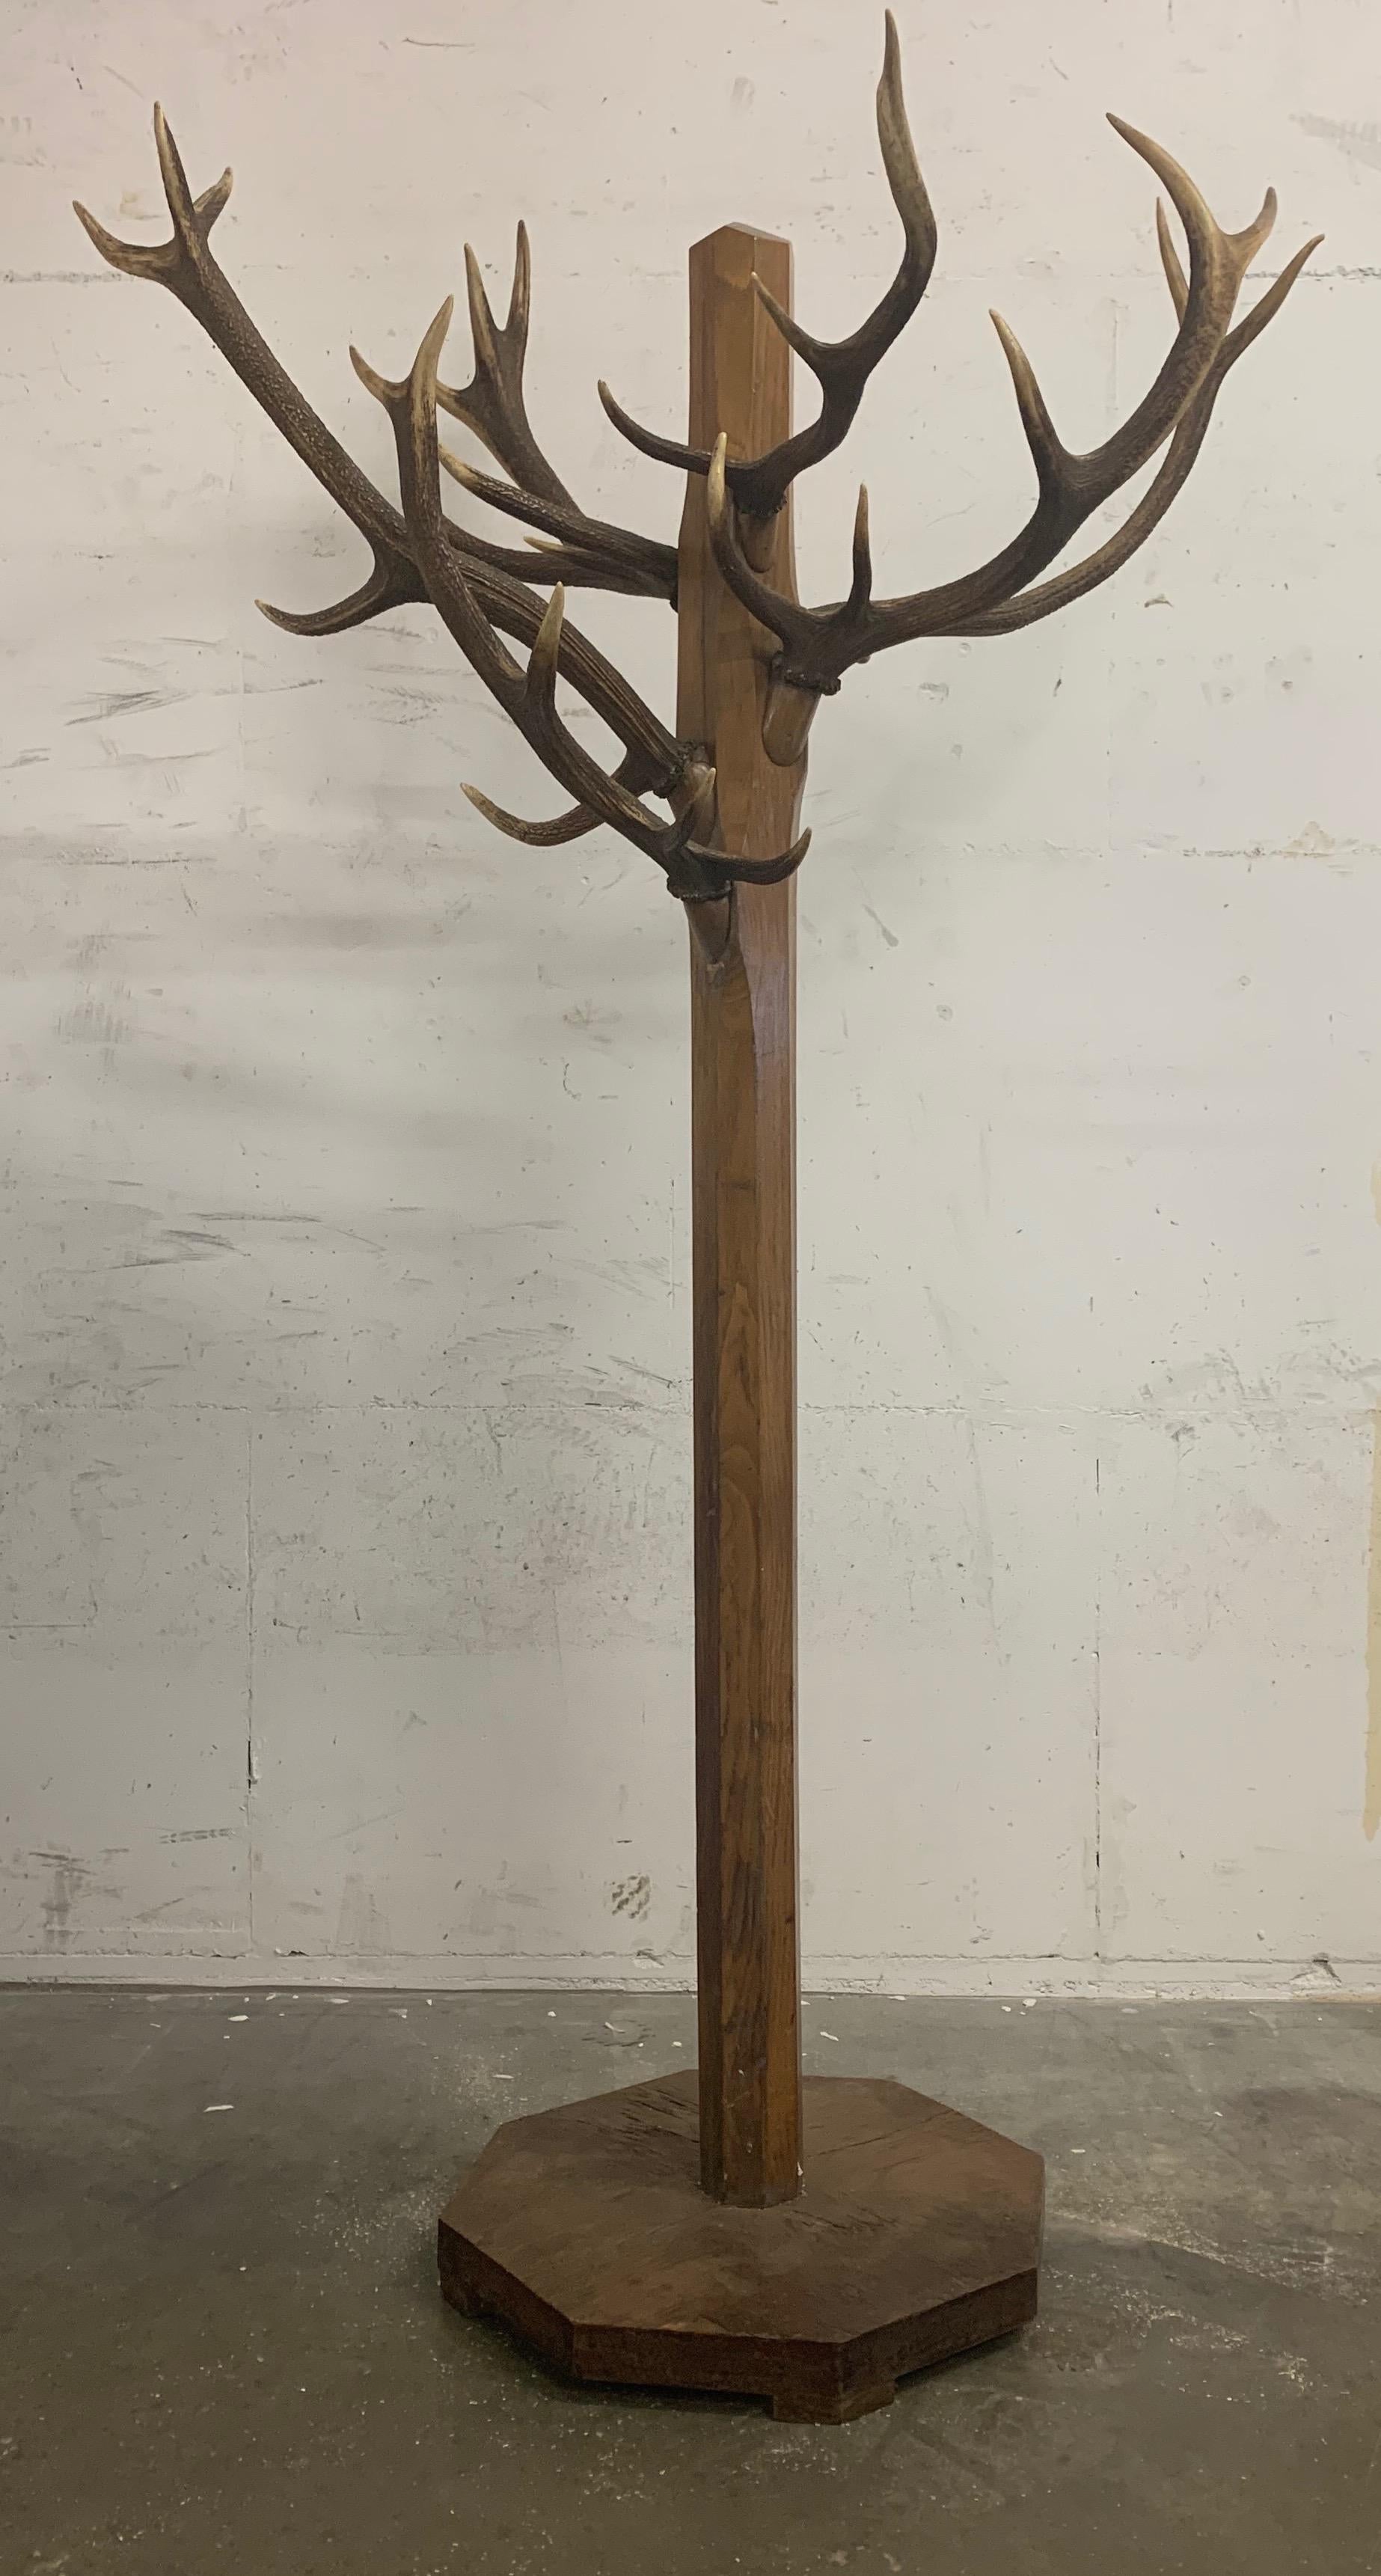 Antique and stunning, tree-shape floor coatrack.

This unique and all handcrafted coat rack of substantial size and weight is another one of our recent great finds. If you happen to own a hunting cabin or lodge or perhaps a restaurant in the